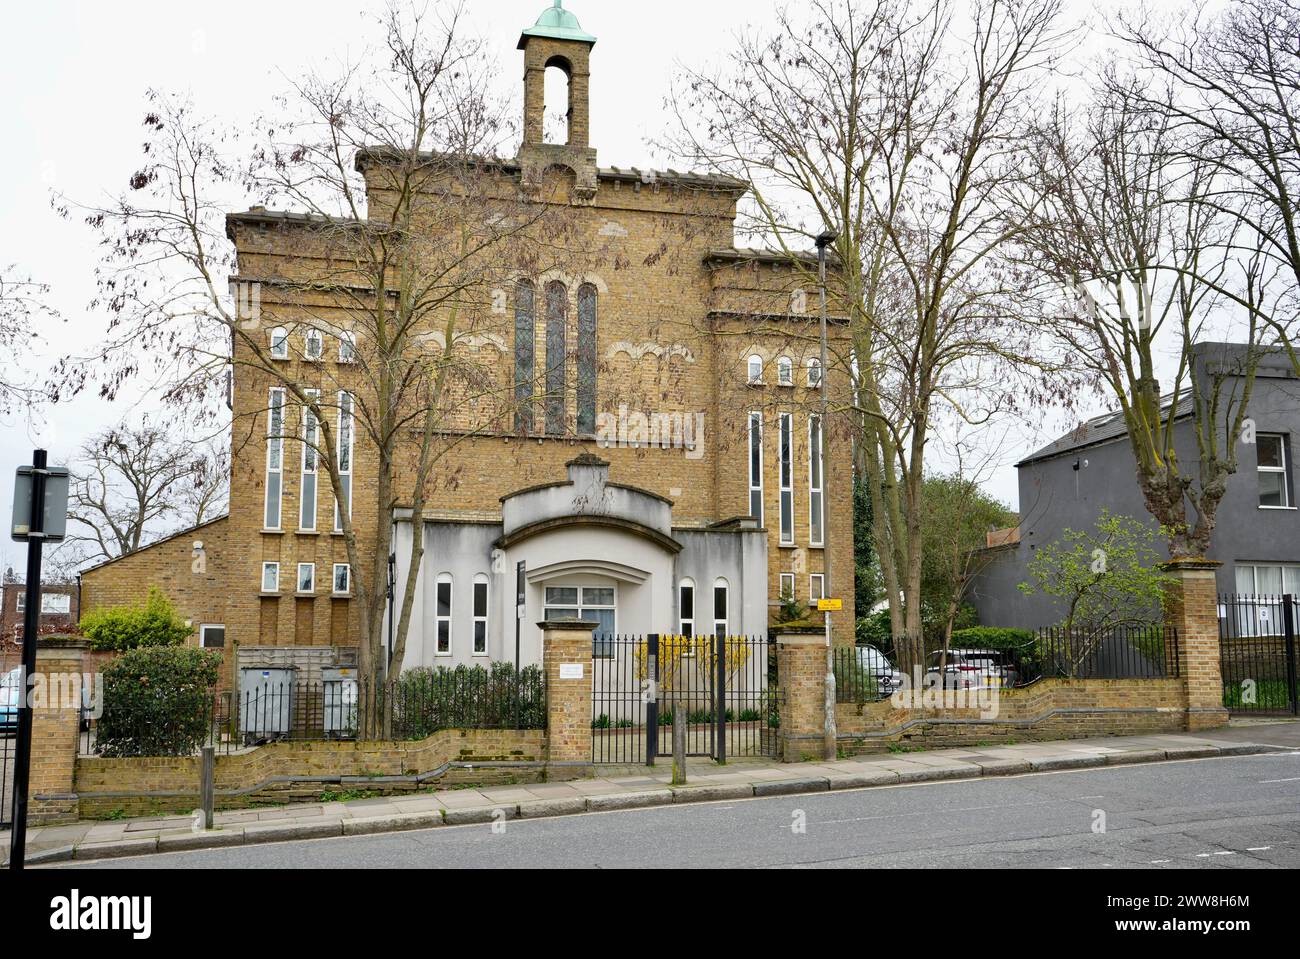 The Old St James Church, Burrage Rd, Plumstead. Originally built in 1855, Now St James Heights Flats. Stock Photo